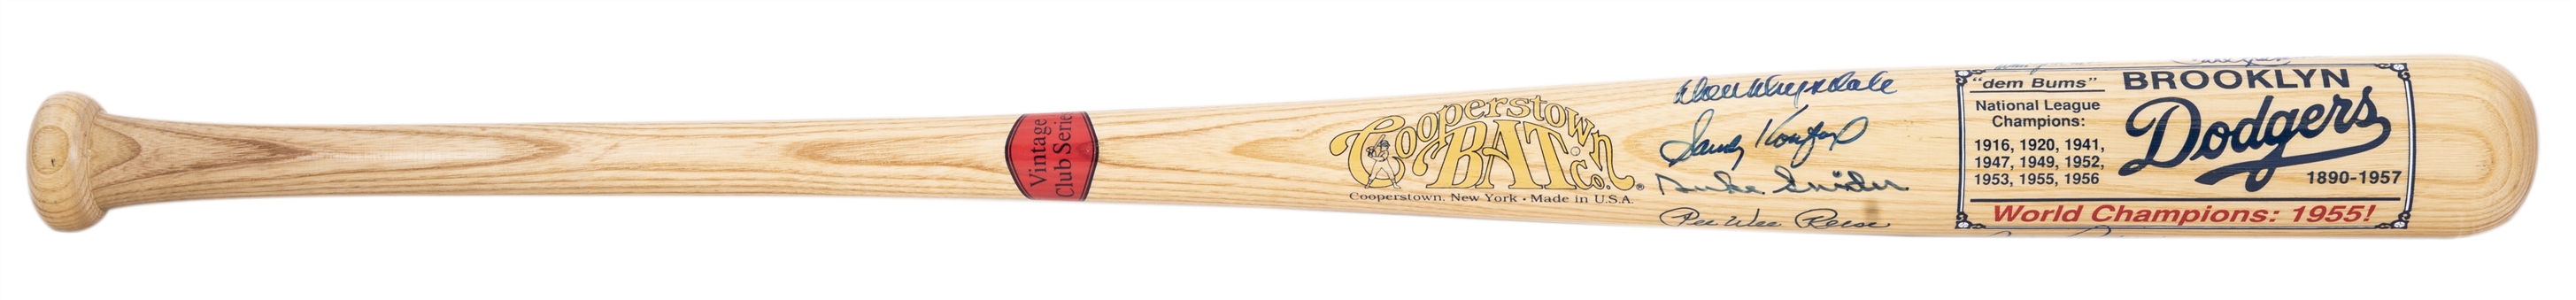 1955 World Champions Brooklyn Dodgers Team Signed Cooperstown Vintage Club Series Bat With 11 Signatures (JSA)